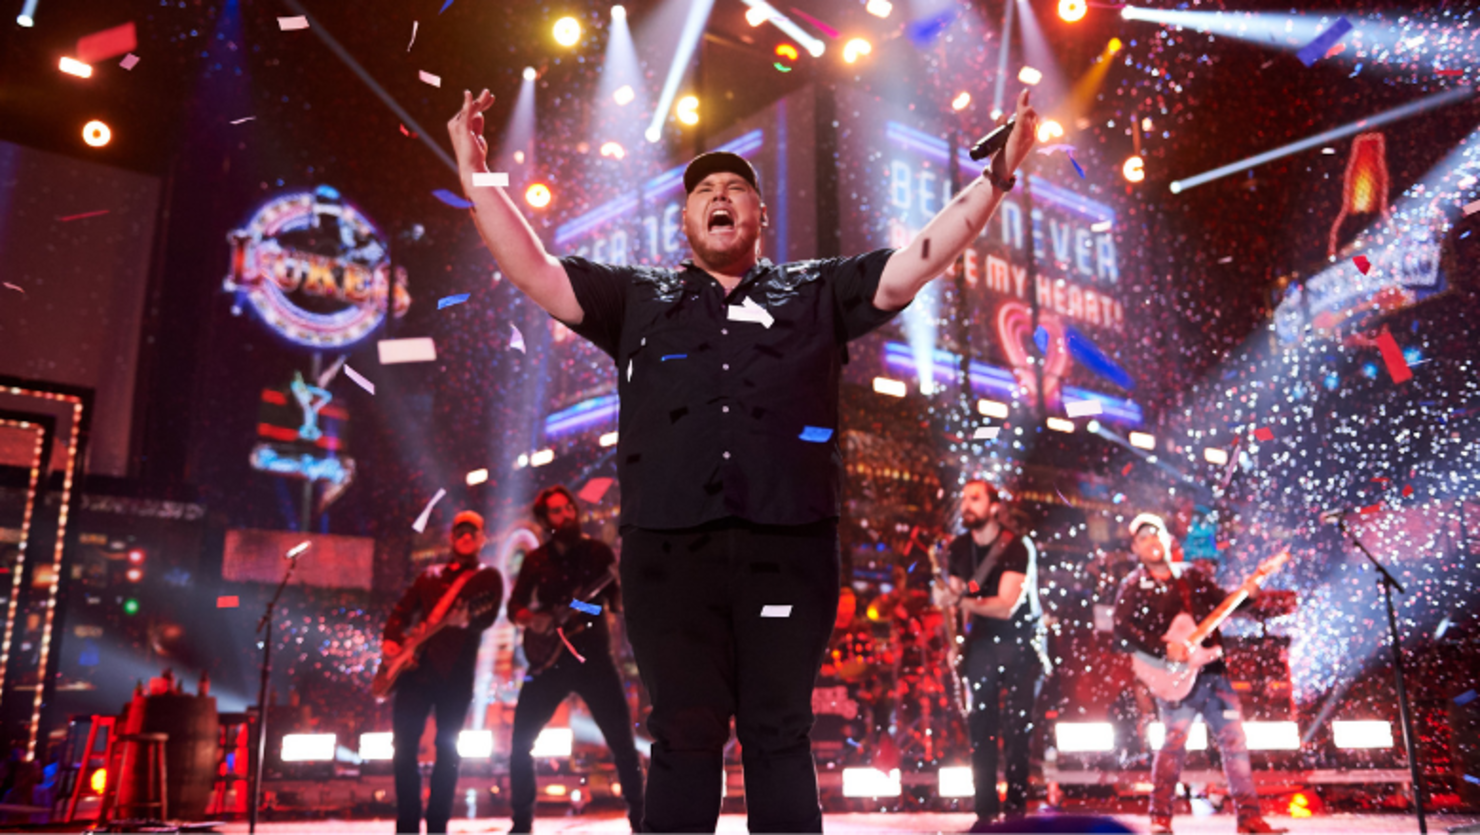 Luke Combs Announces New Album Coming This Fall